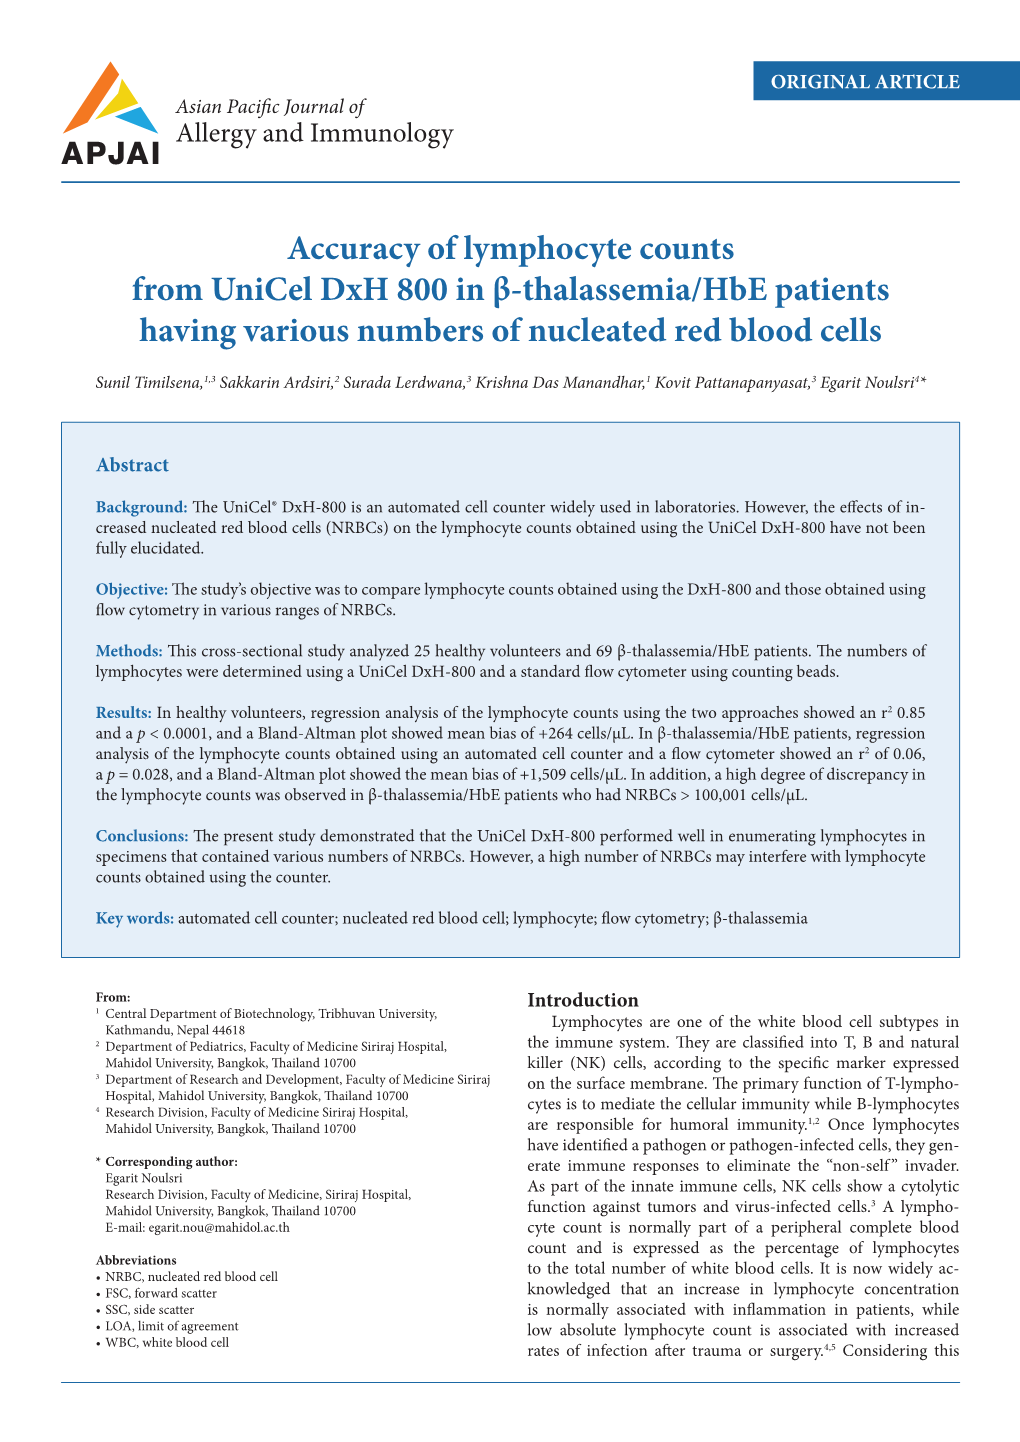 Accuracy of Lymphocyte Counts from Unicel Dxh 800 in Β-Thalassemia/Hbe Patients Having Various Numbers of Nucleated Red Blood Cells